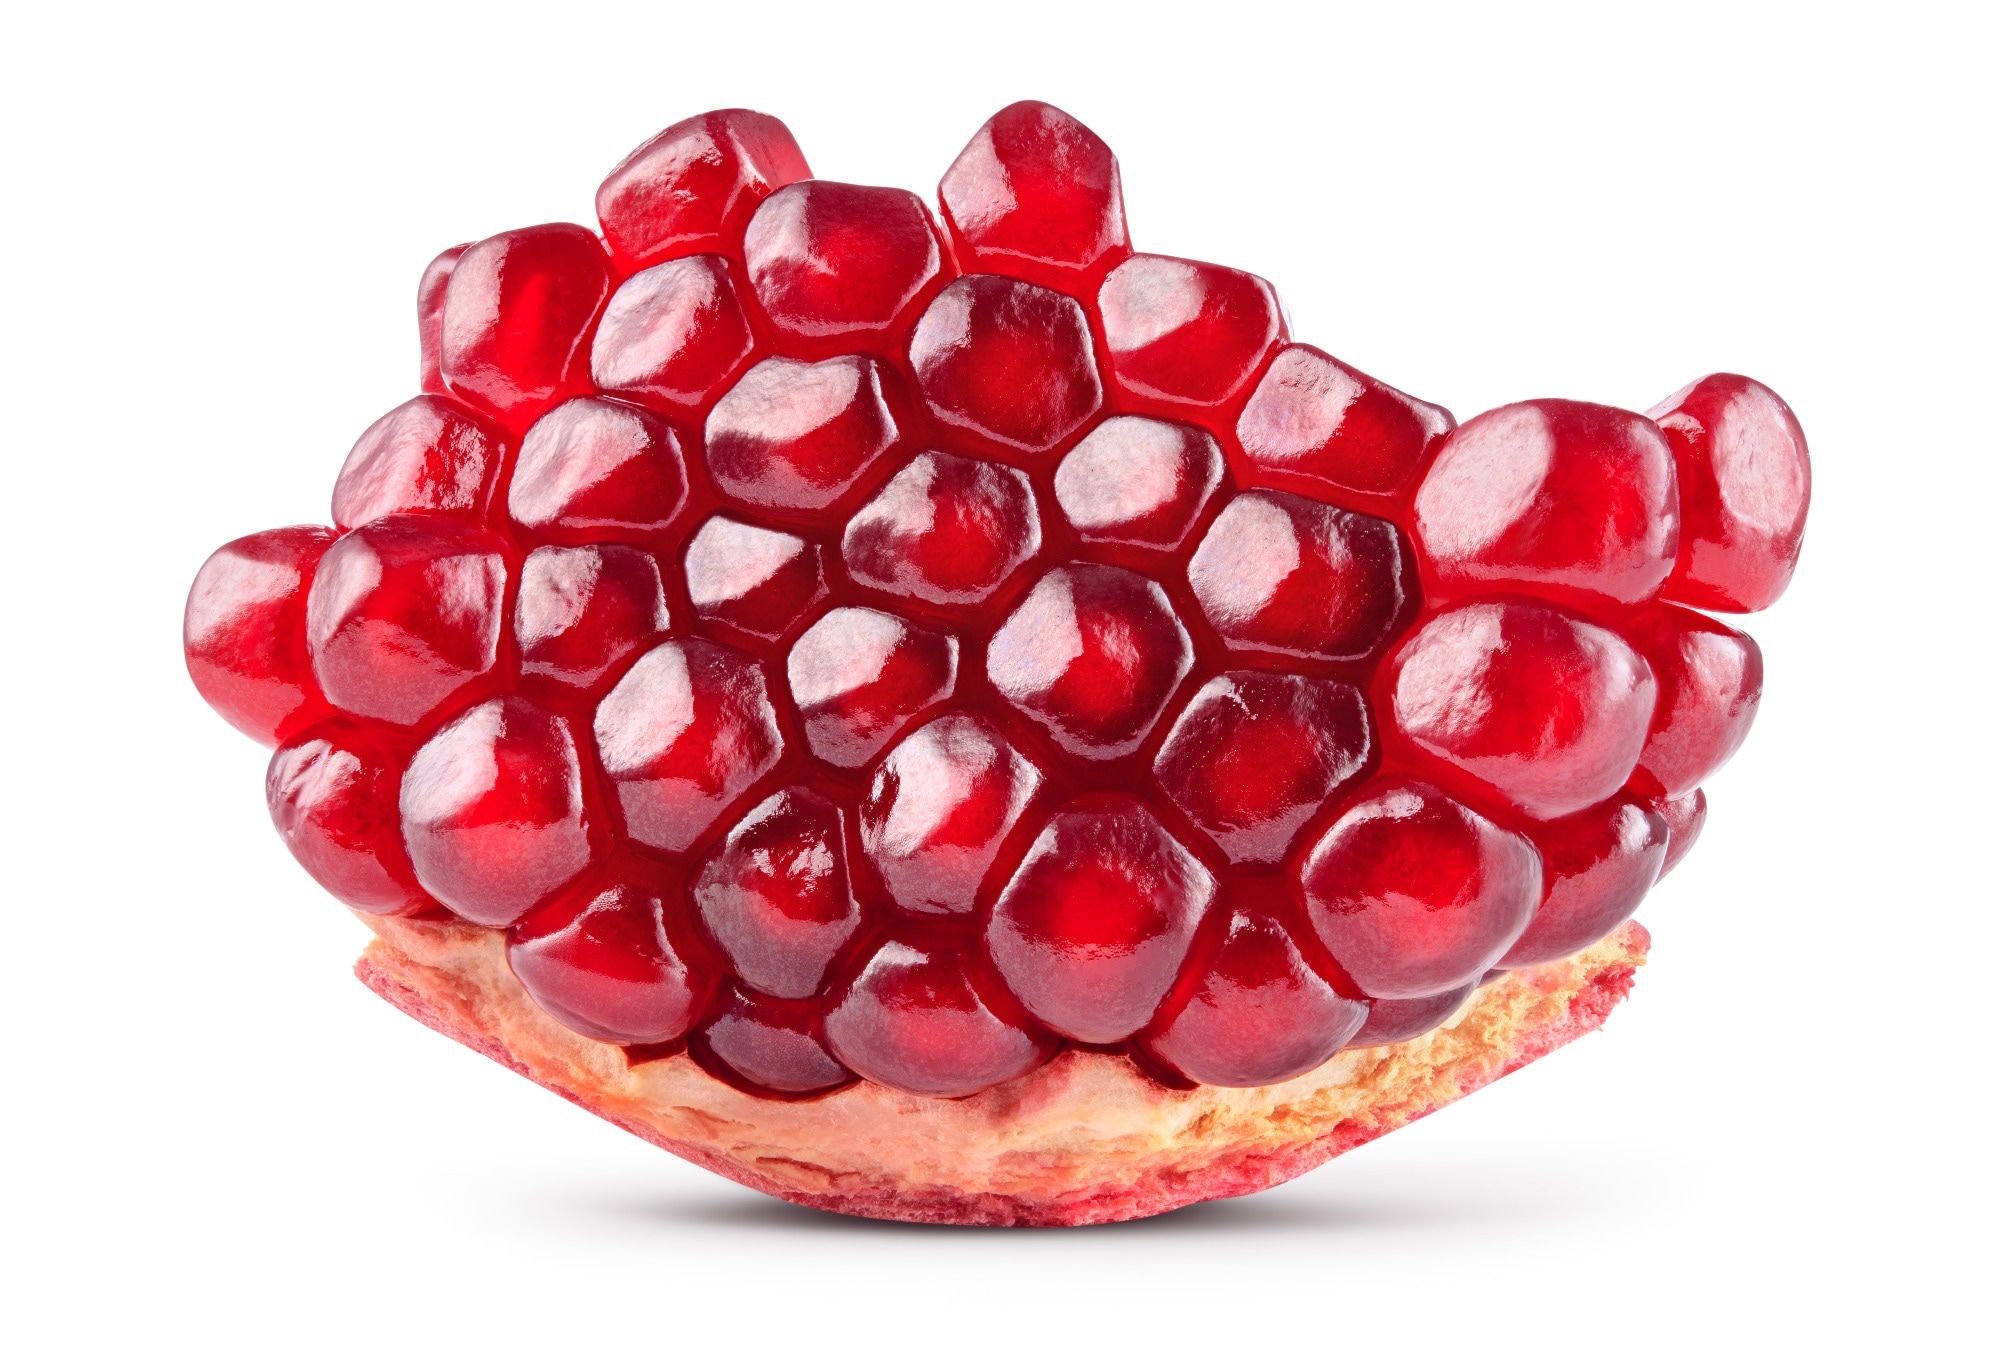 Study: The Effects of Pomegranate Seed Oil on Mild Cognitive Impairment. Image Credit: Tim UR / Shutterstock